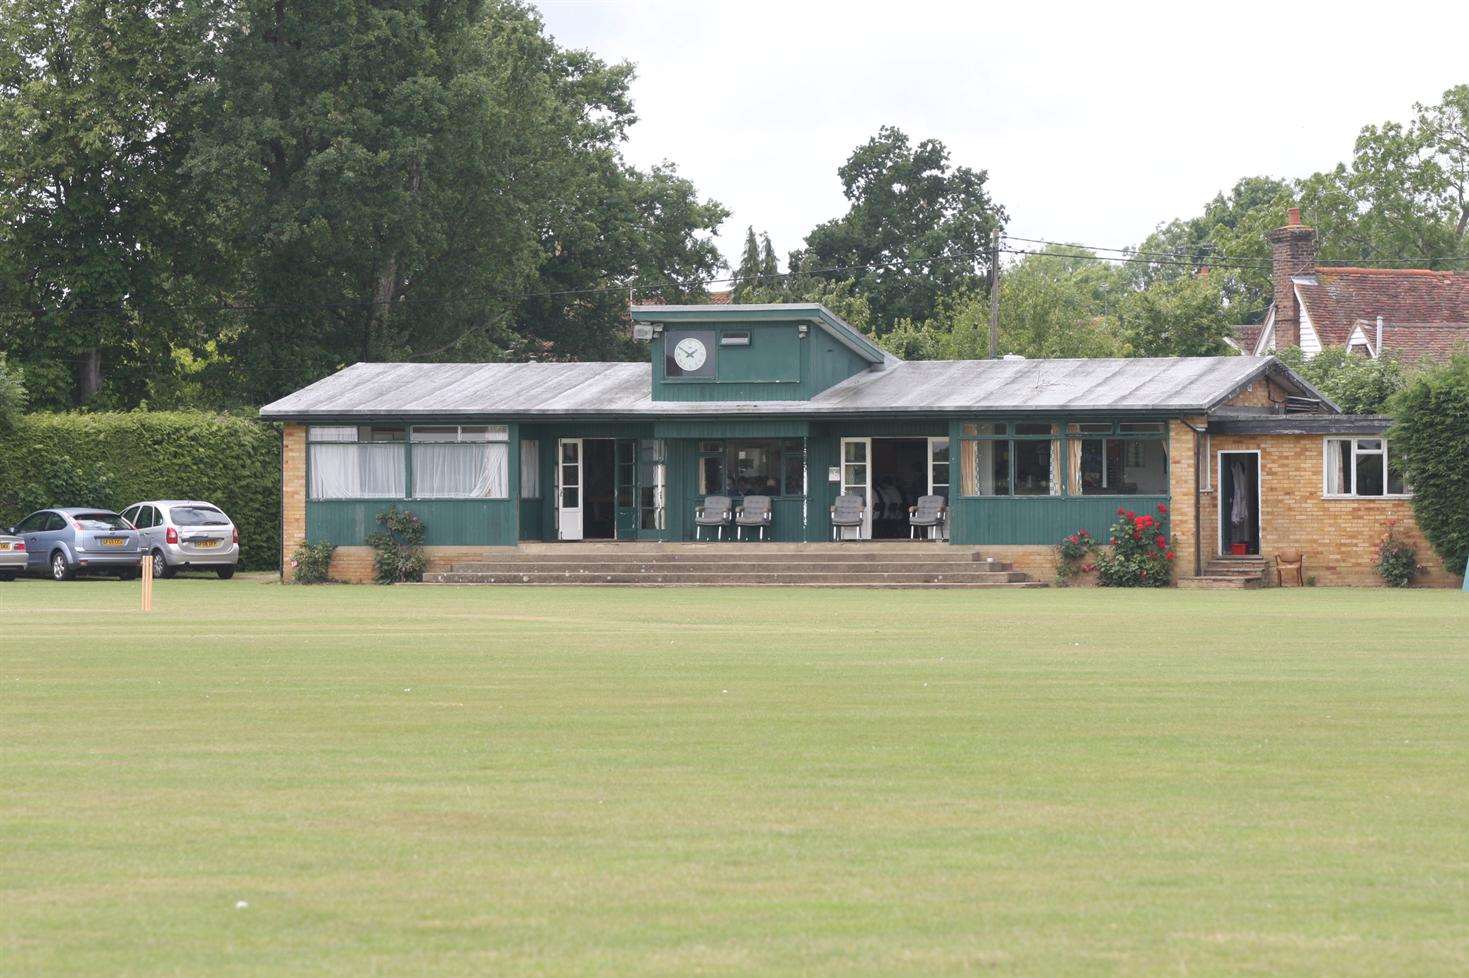 The club is set to move to new grounds to the north of the village